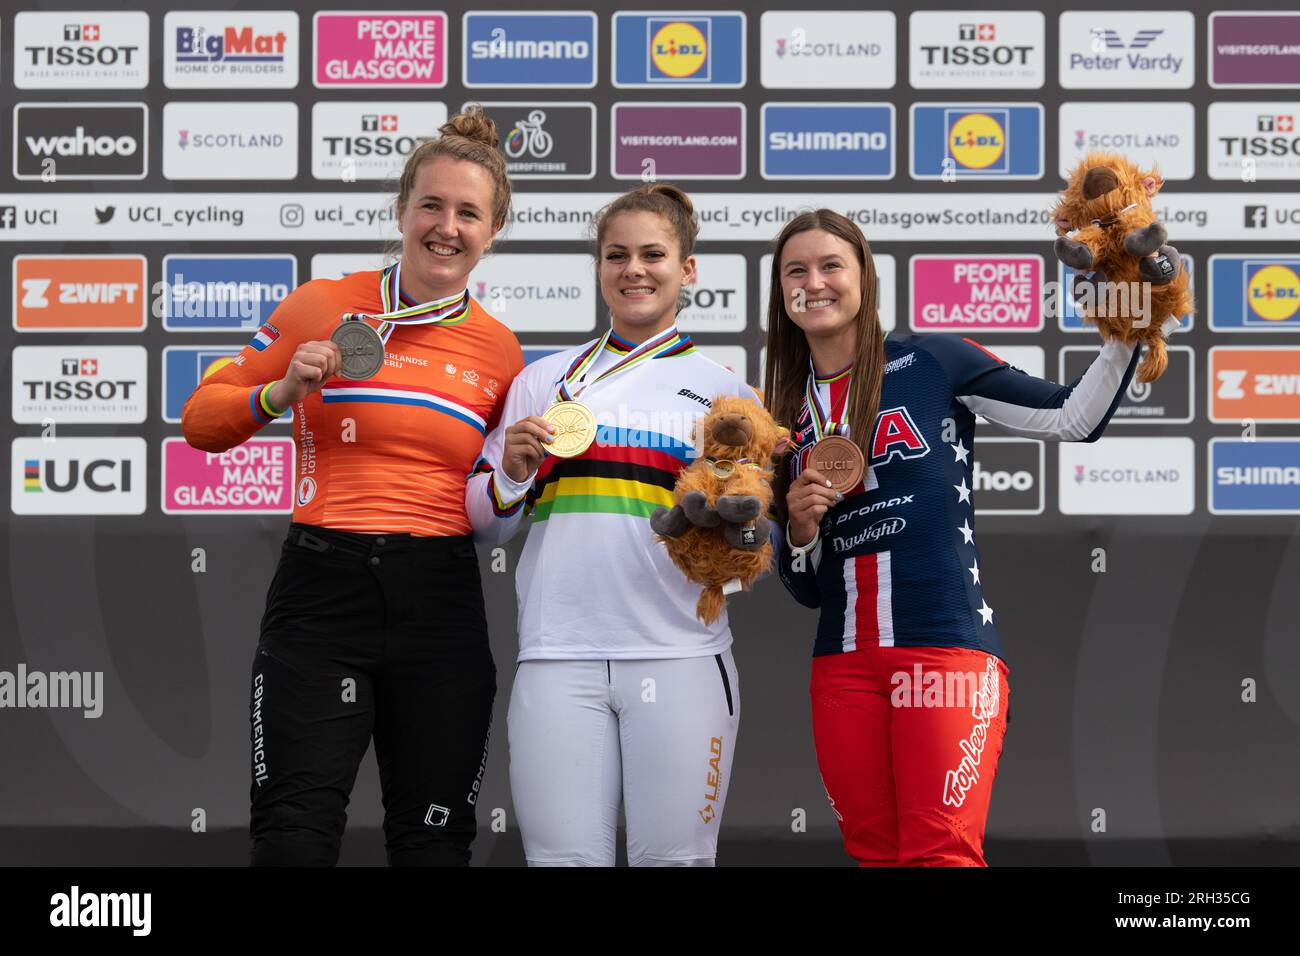 Glasgow BMX Centre, Glasgow, Scotland, UK. 13th Aug, 2023. UCI Cycling World Championships BMX Racing Women's Elite Final podium Gold Bethany Shriever (GB) Silver Laura Sulders (Netherlands) Bronze Alise Willoughby (USA) Credit: Kay Roxby/Alamy Live News Stock Photo